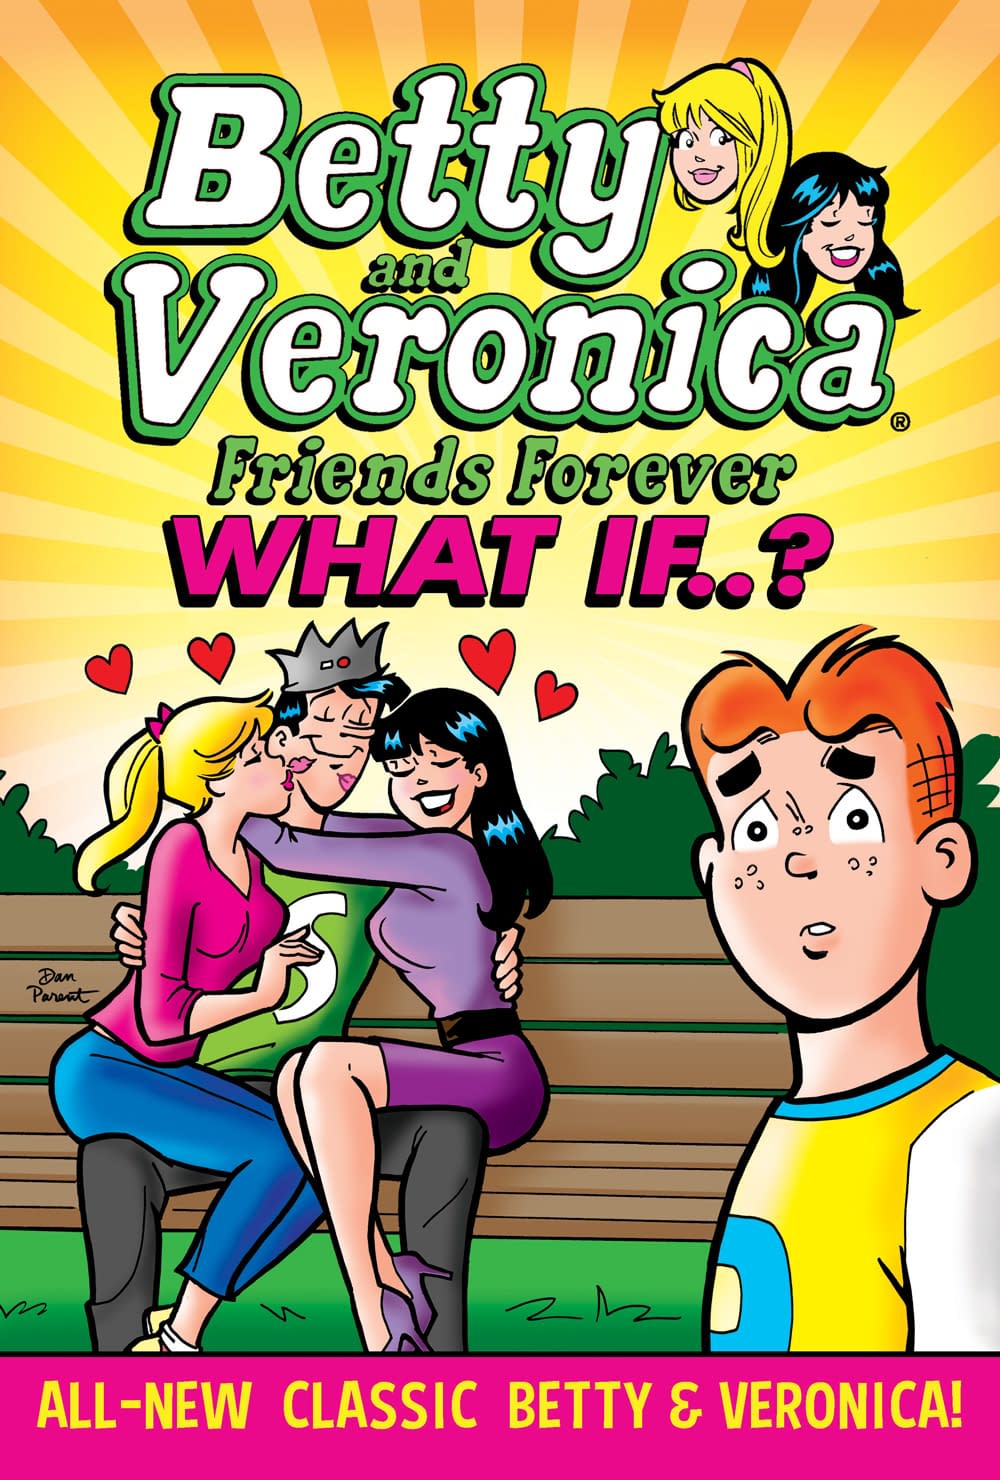 What If Archie Published A Comic Called What If? July 2021 Solicits?